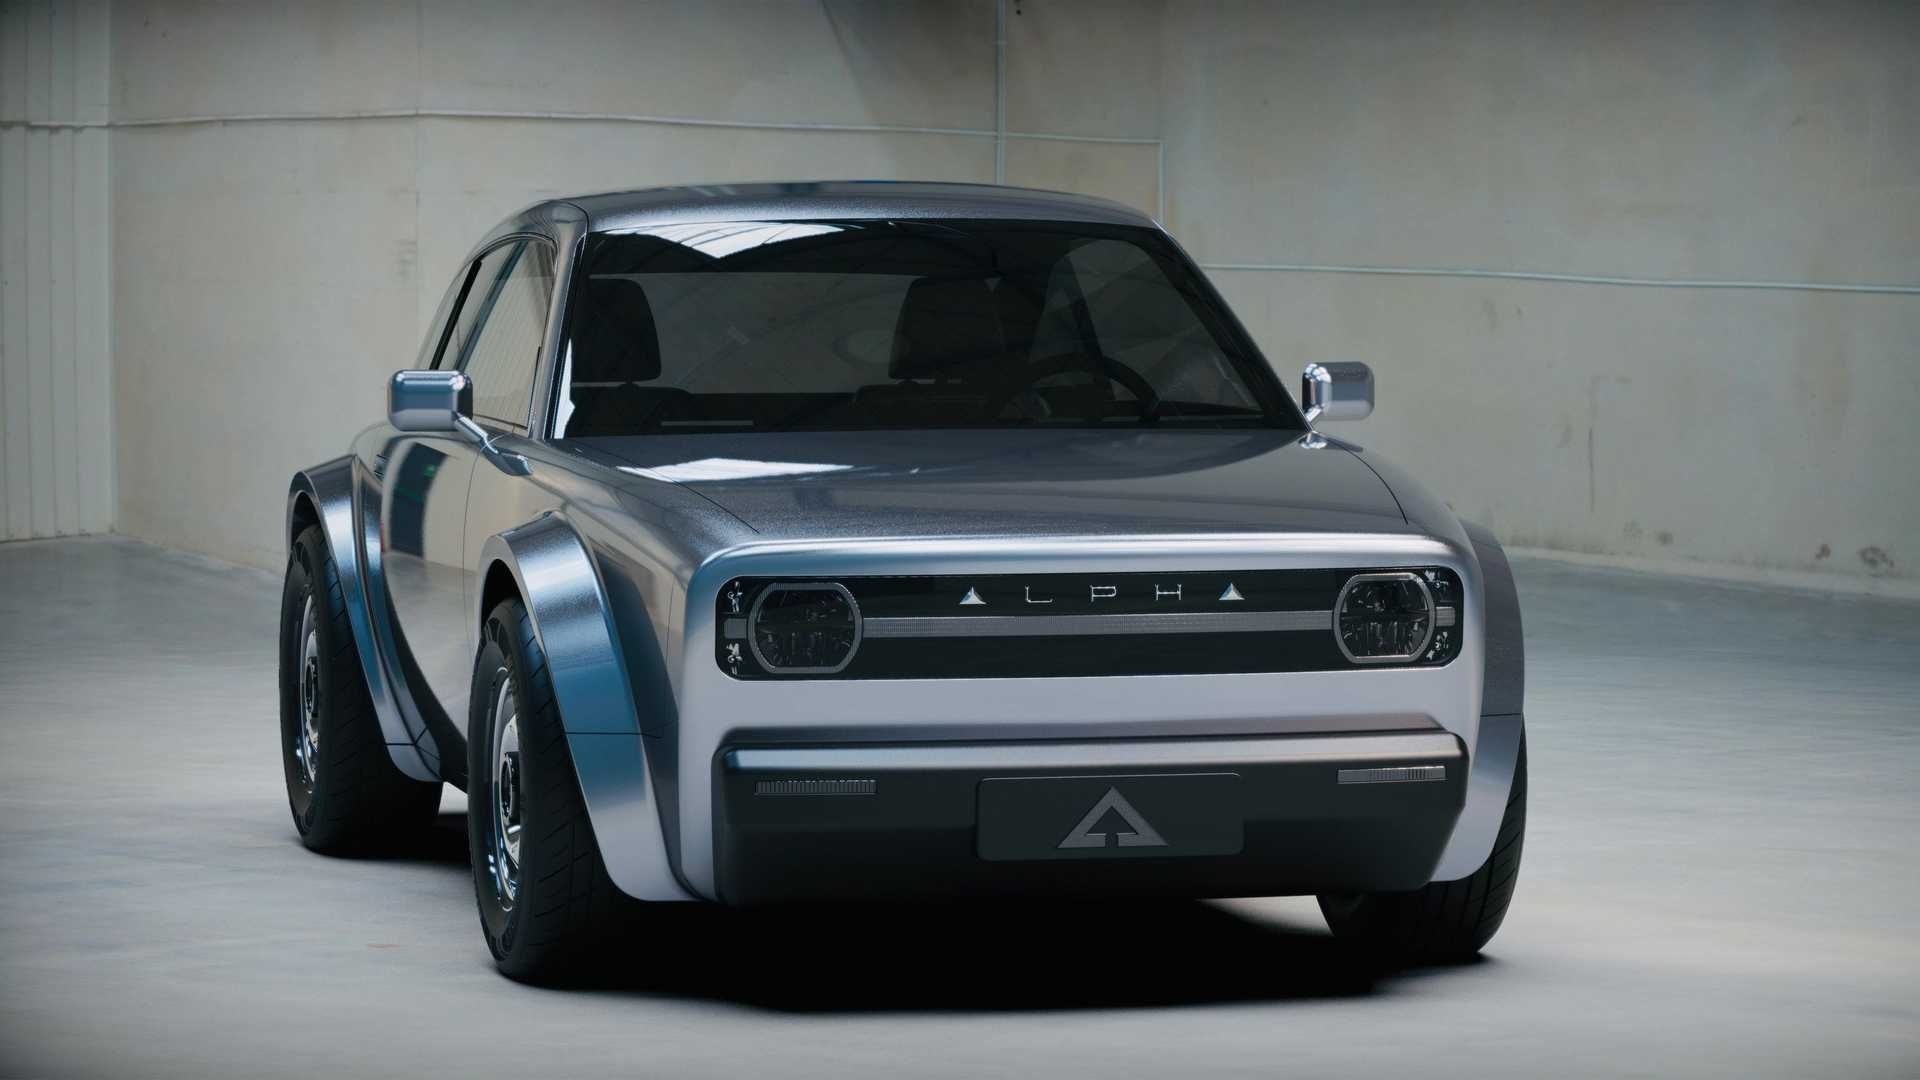 Alpha Ace (Car): Battery vehicle, Unveiled in December 2020, Environment friendly technology. 1920x1080 Full HD Wallpaper.